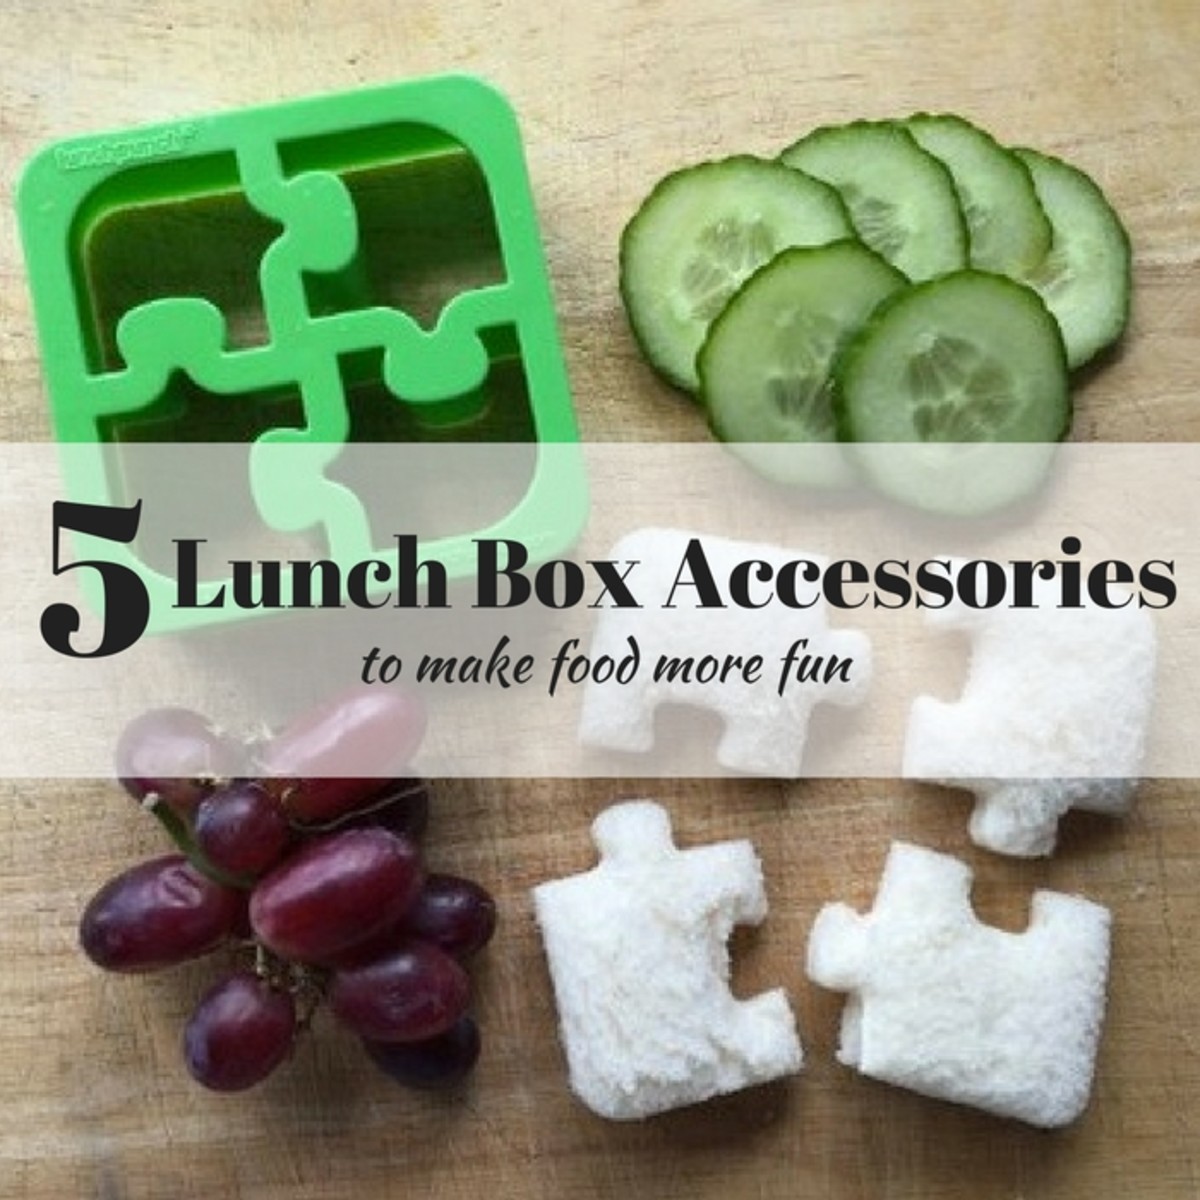 Lunch box accessories